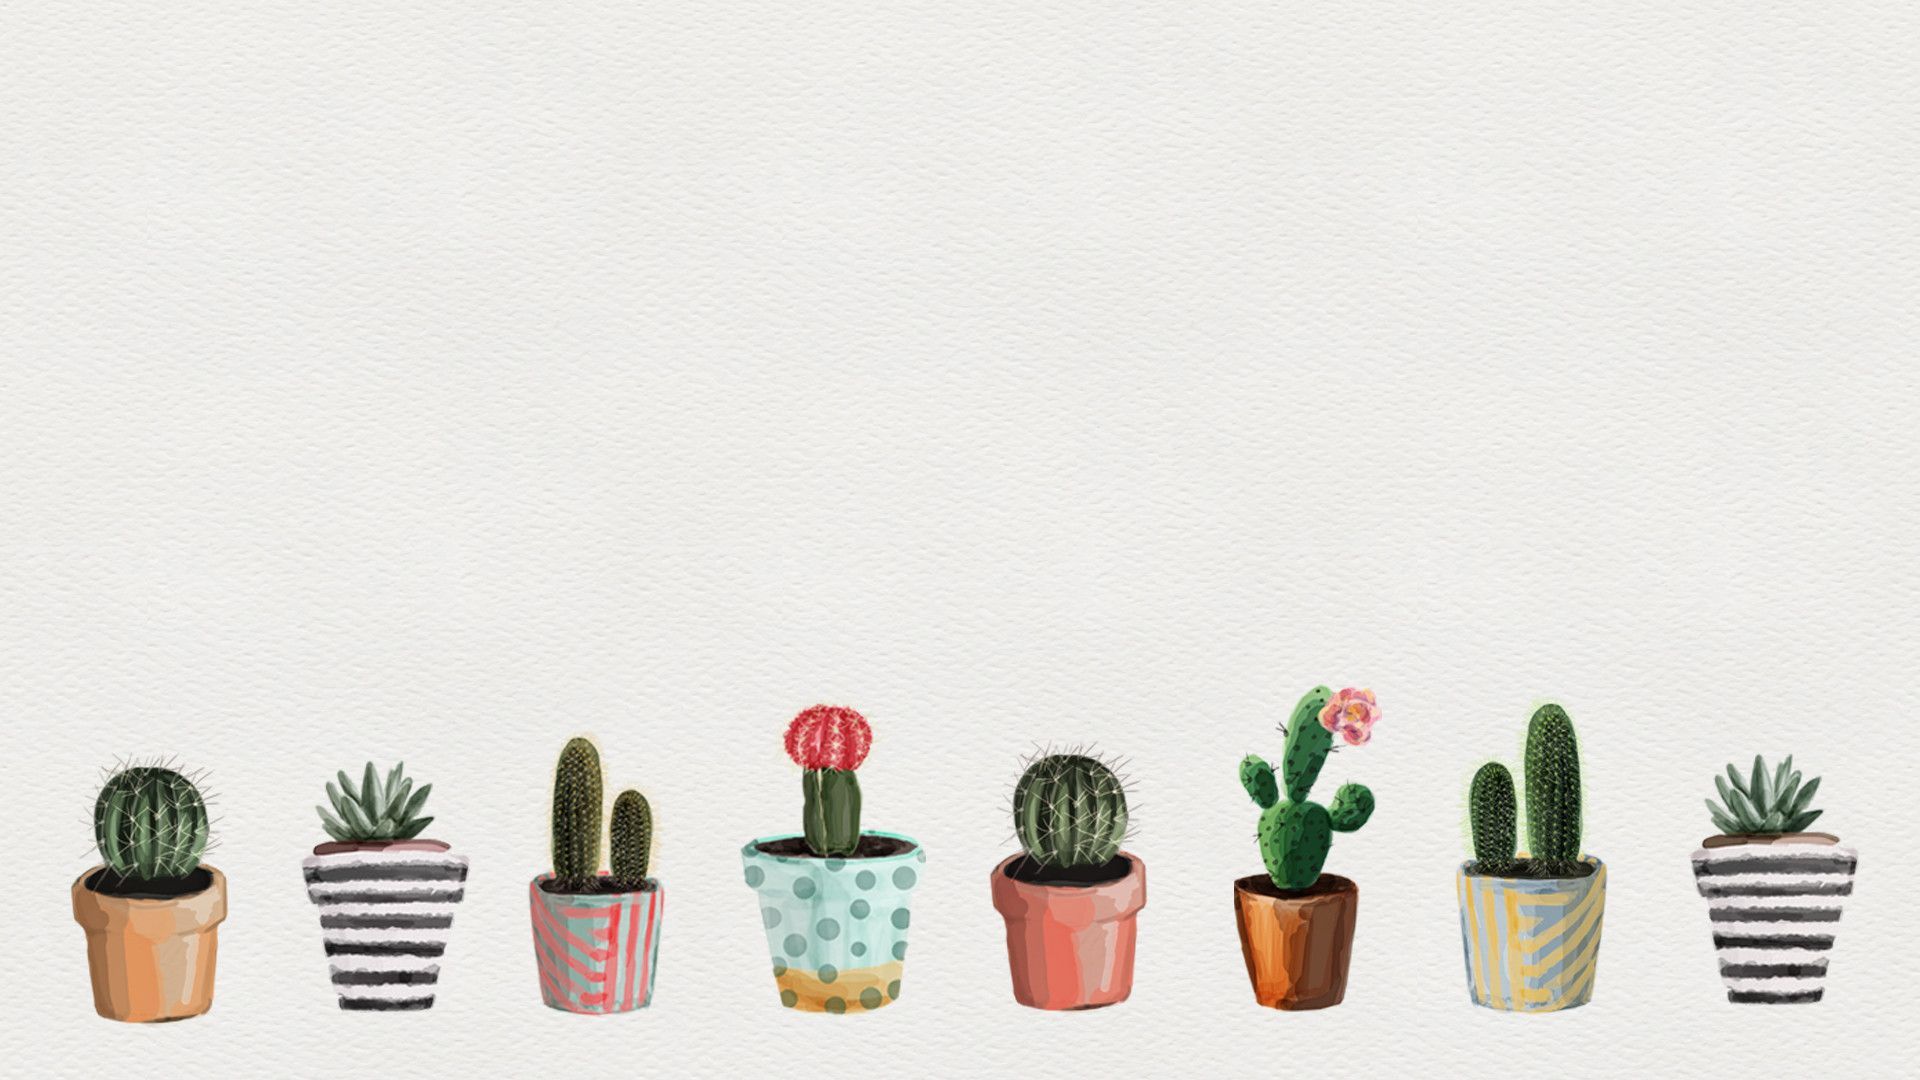 A row of different types of cacti in pots - Cactus, plants, succulent